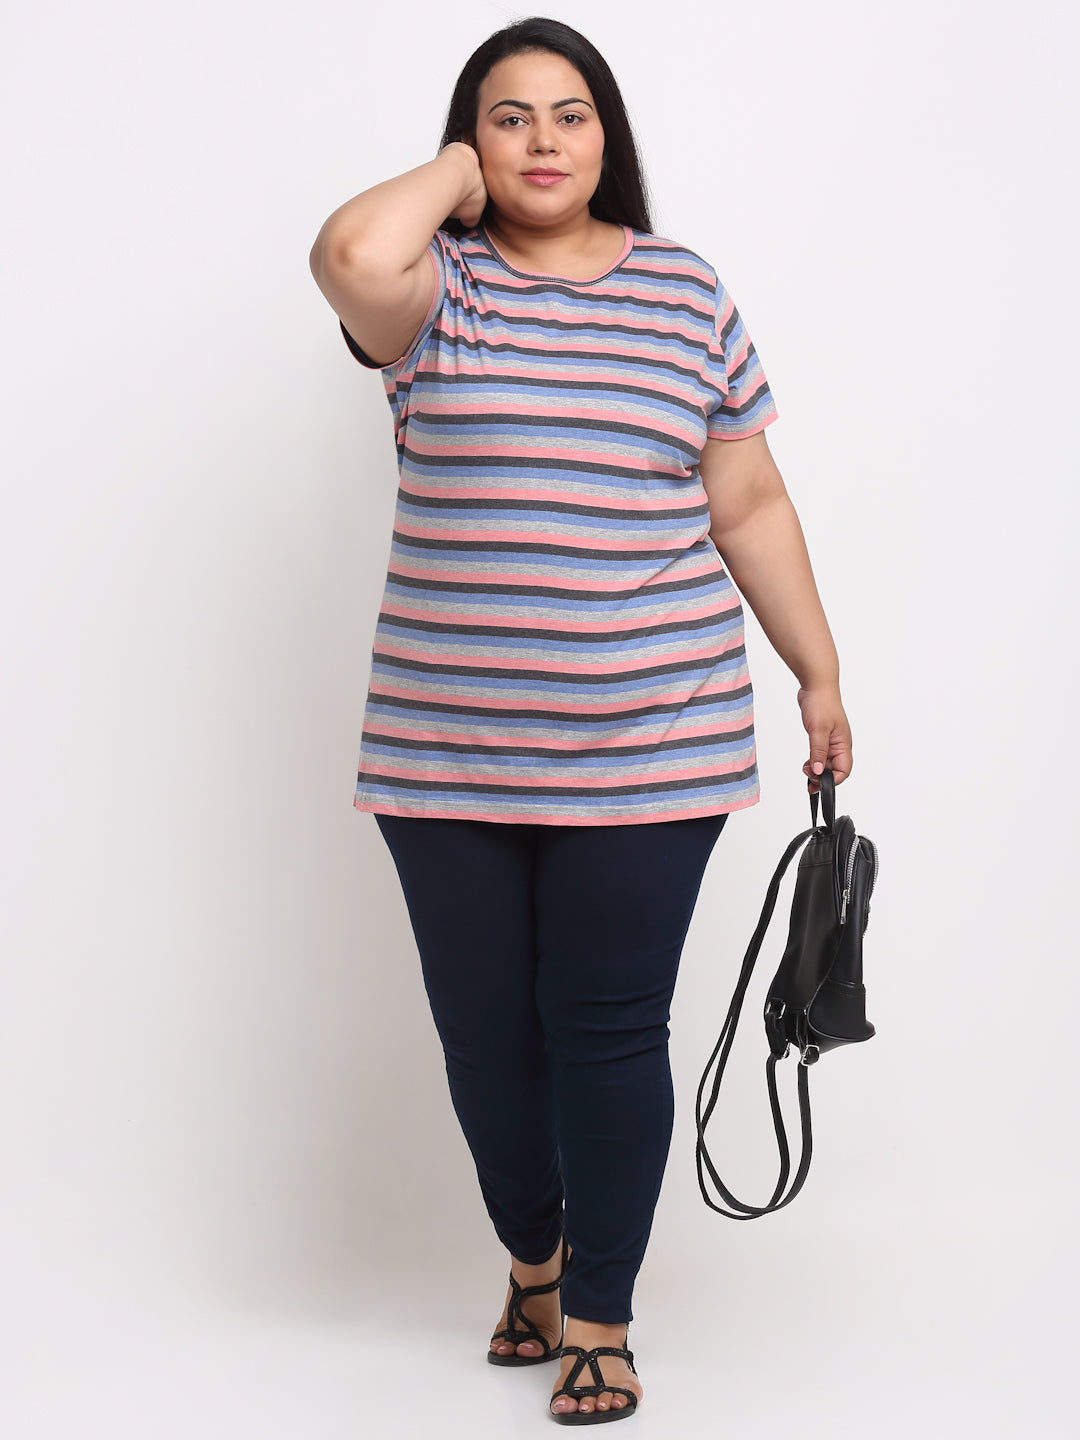 Extra Touch Roused Side Striped Tee Women's Plus size 2X T-Shirt